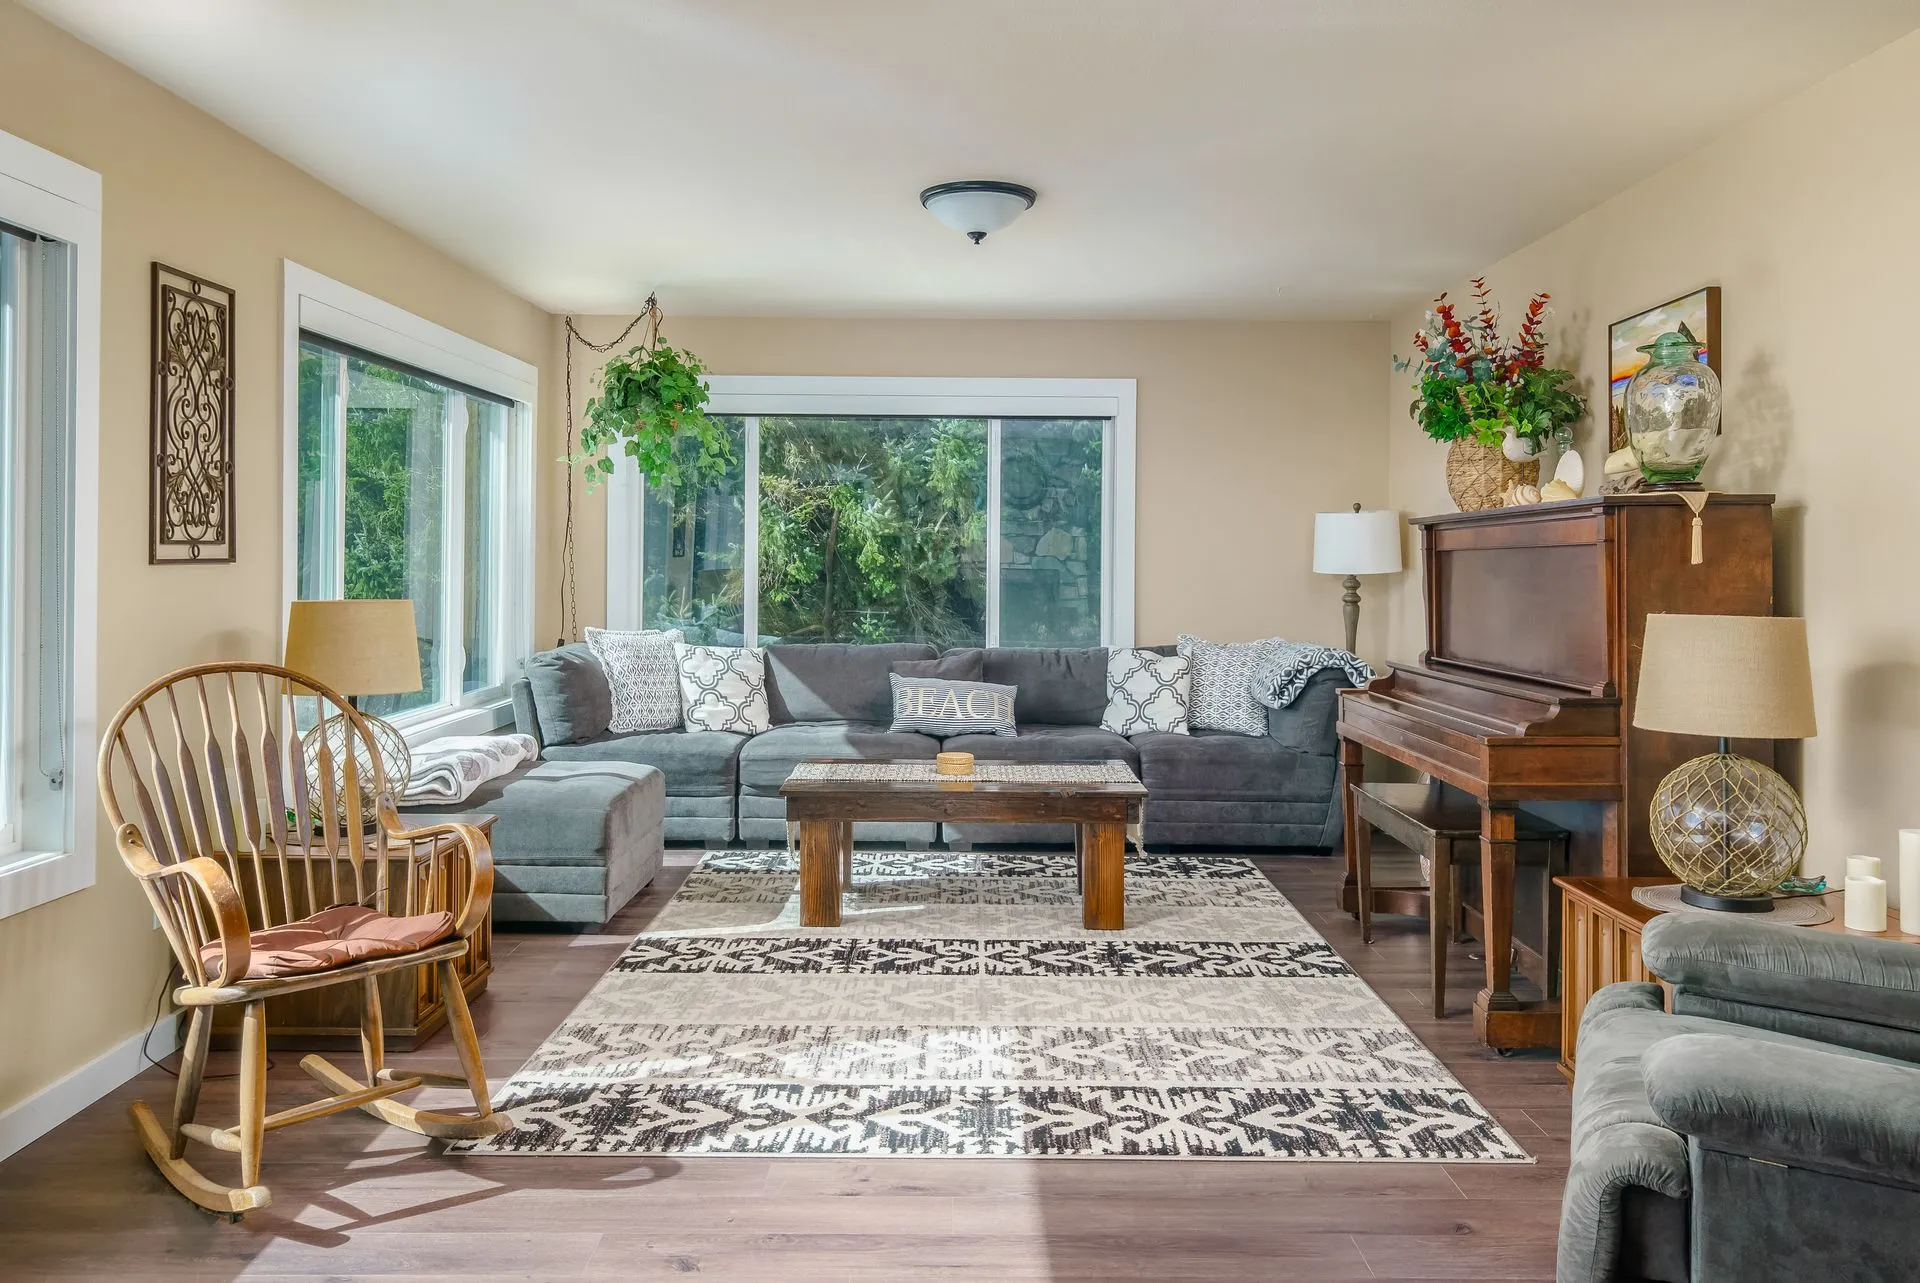 Vacation Rental in Cannon Beach, Anchor's Retreat living room with a piano, couch, rocking chair and armchair